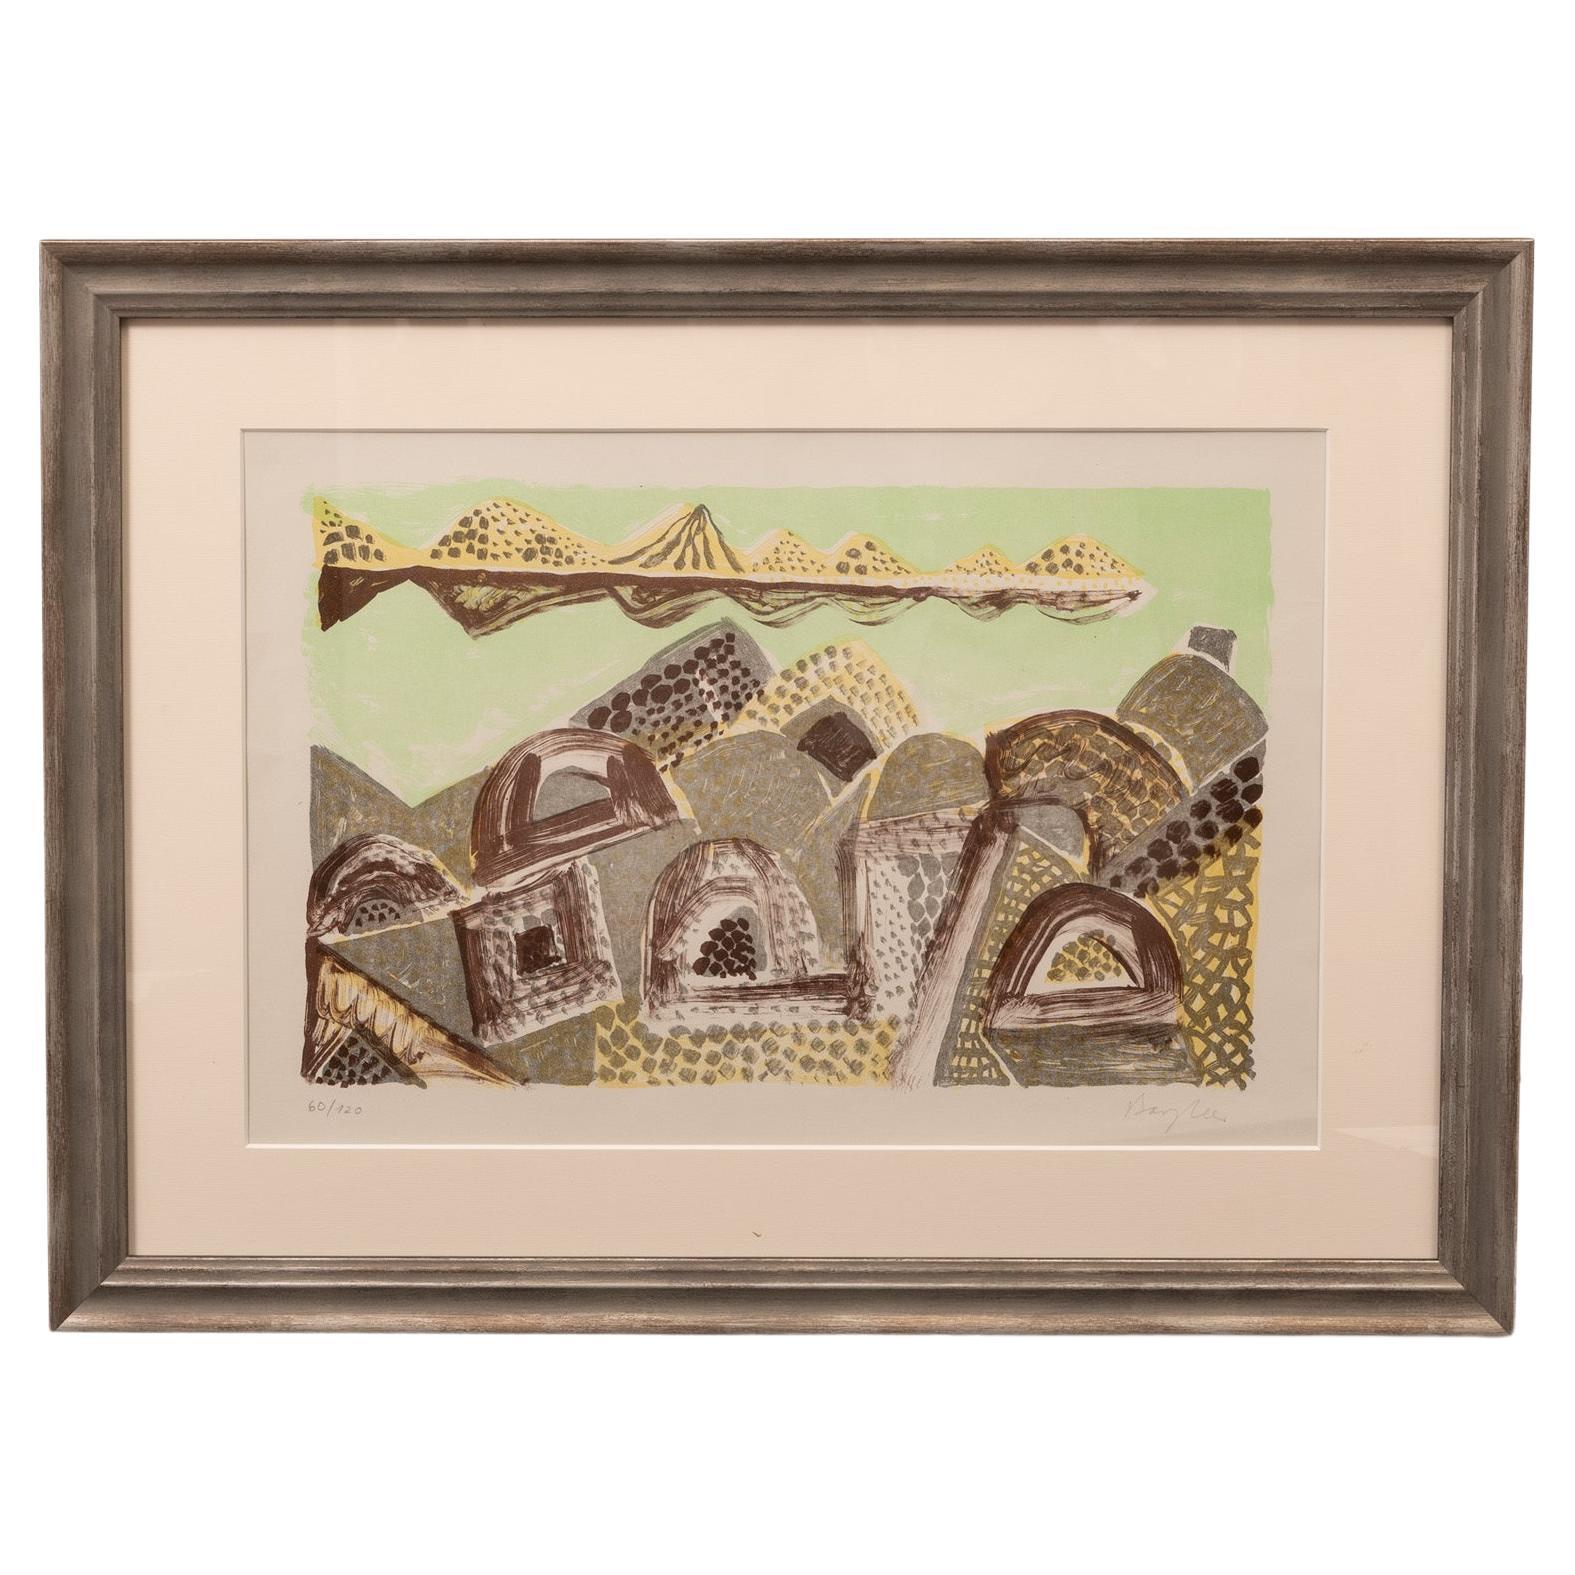 Eduard Bargheer "Village in the desert", 1973  Color lithograph on laid paper